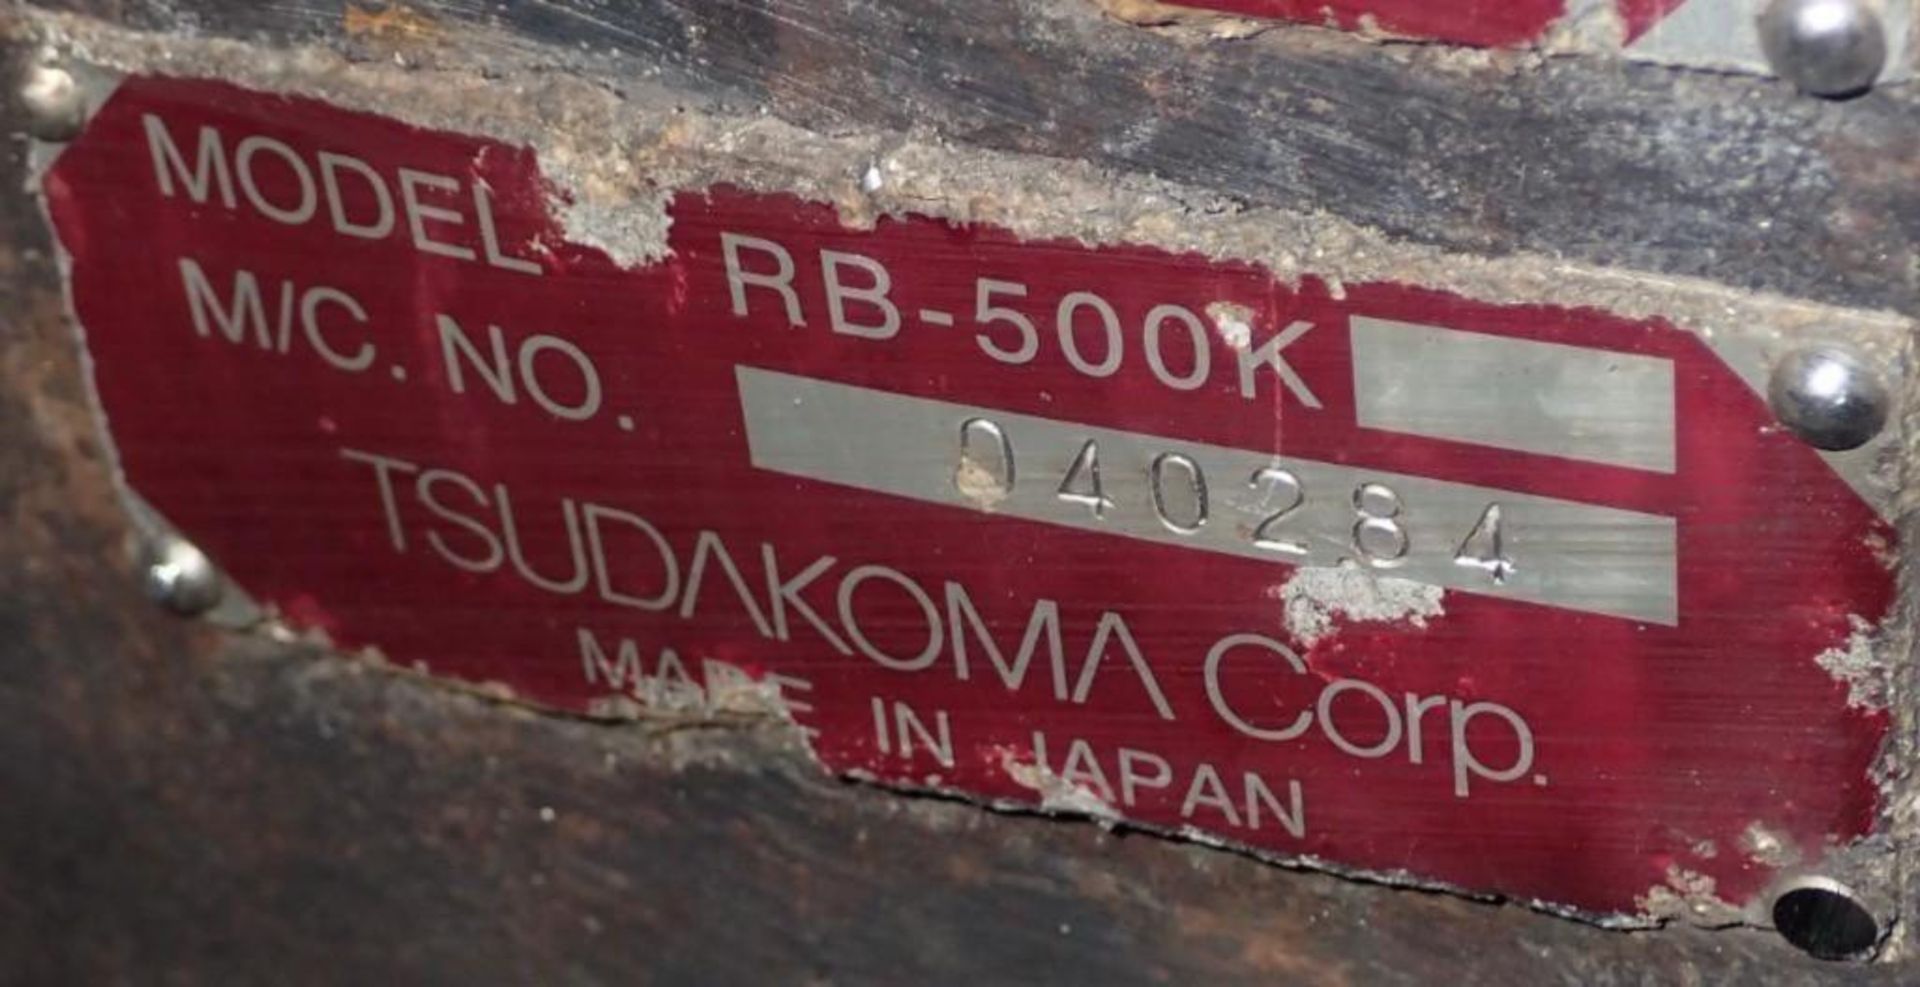 Tsudakoma #RB-500K Trunion 4 / 5 Axis Rotary Table - Image 8 of 8